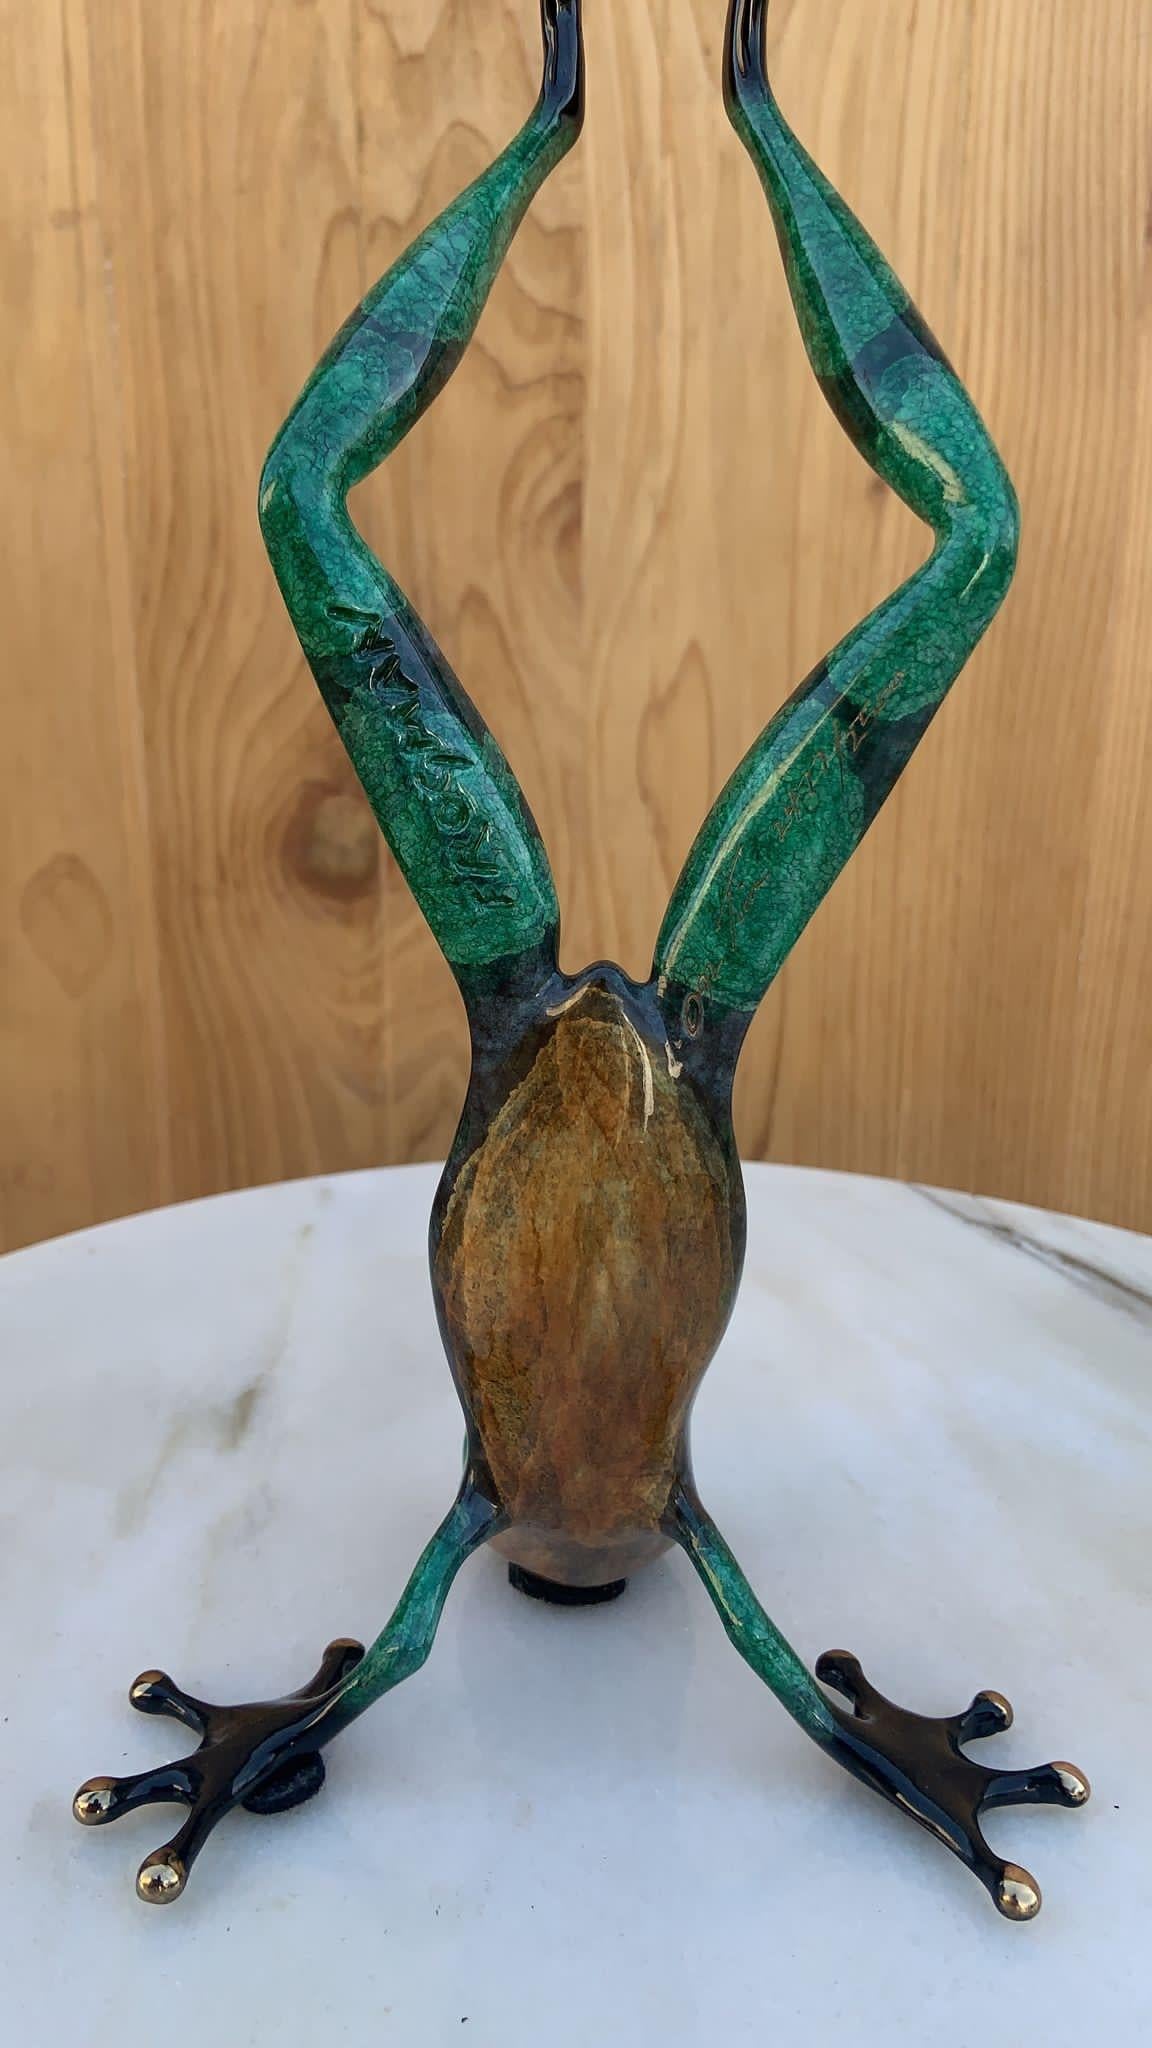 Hand-Crafted Vintage Bronze Frog Show Off by Frogman Artist Tim Cotterill